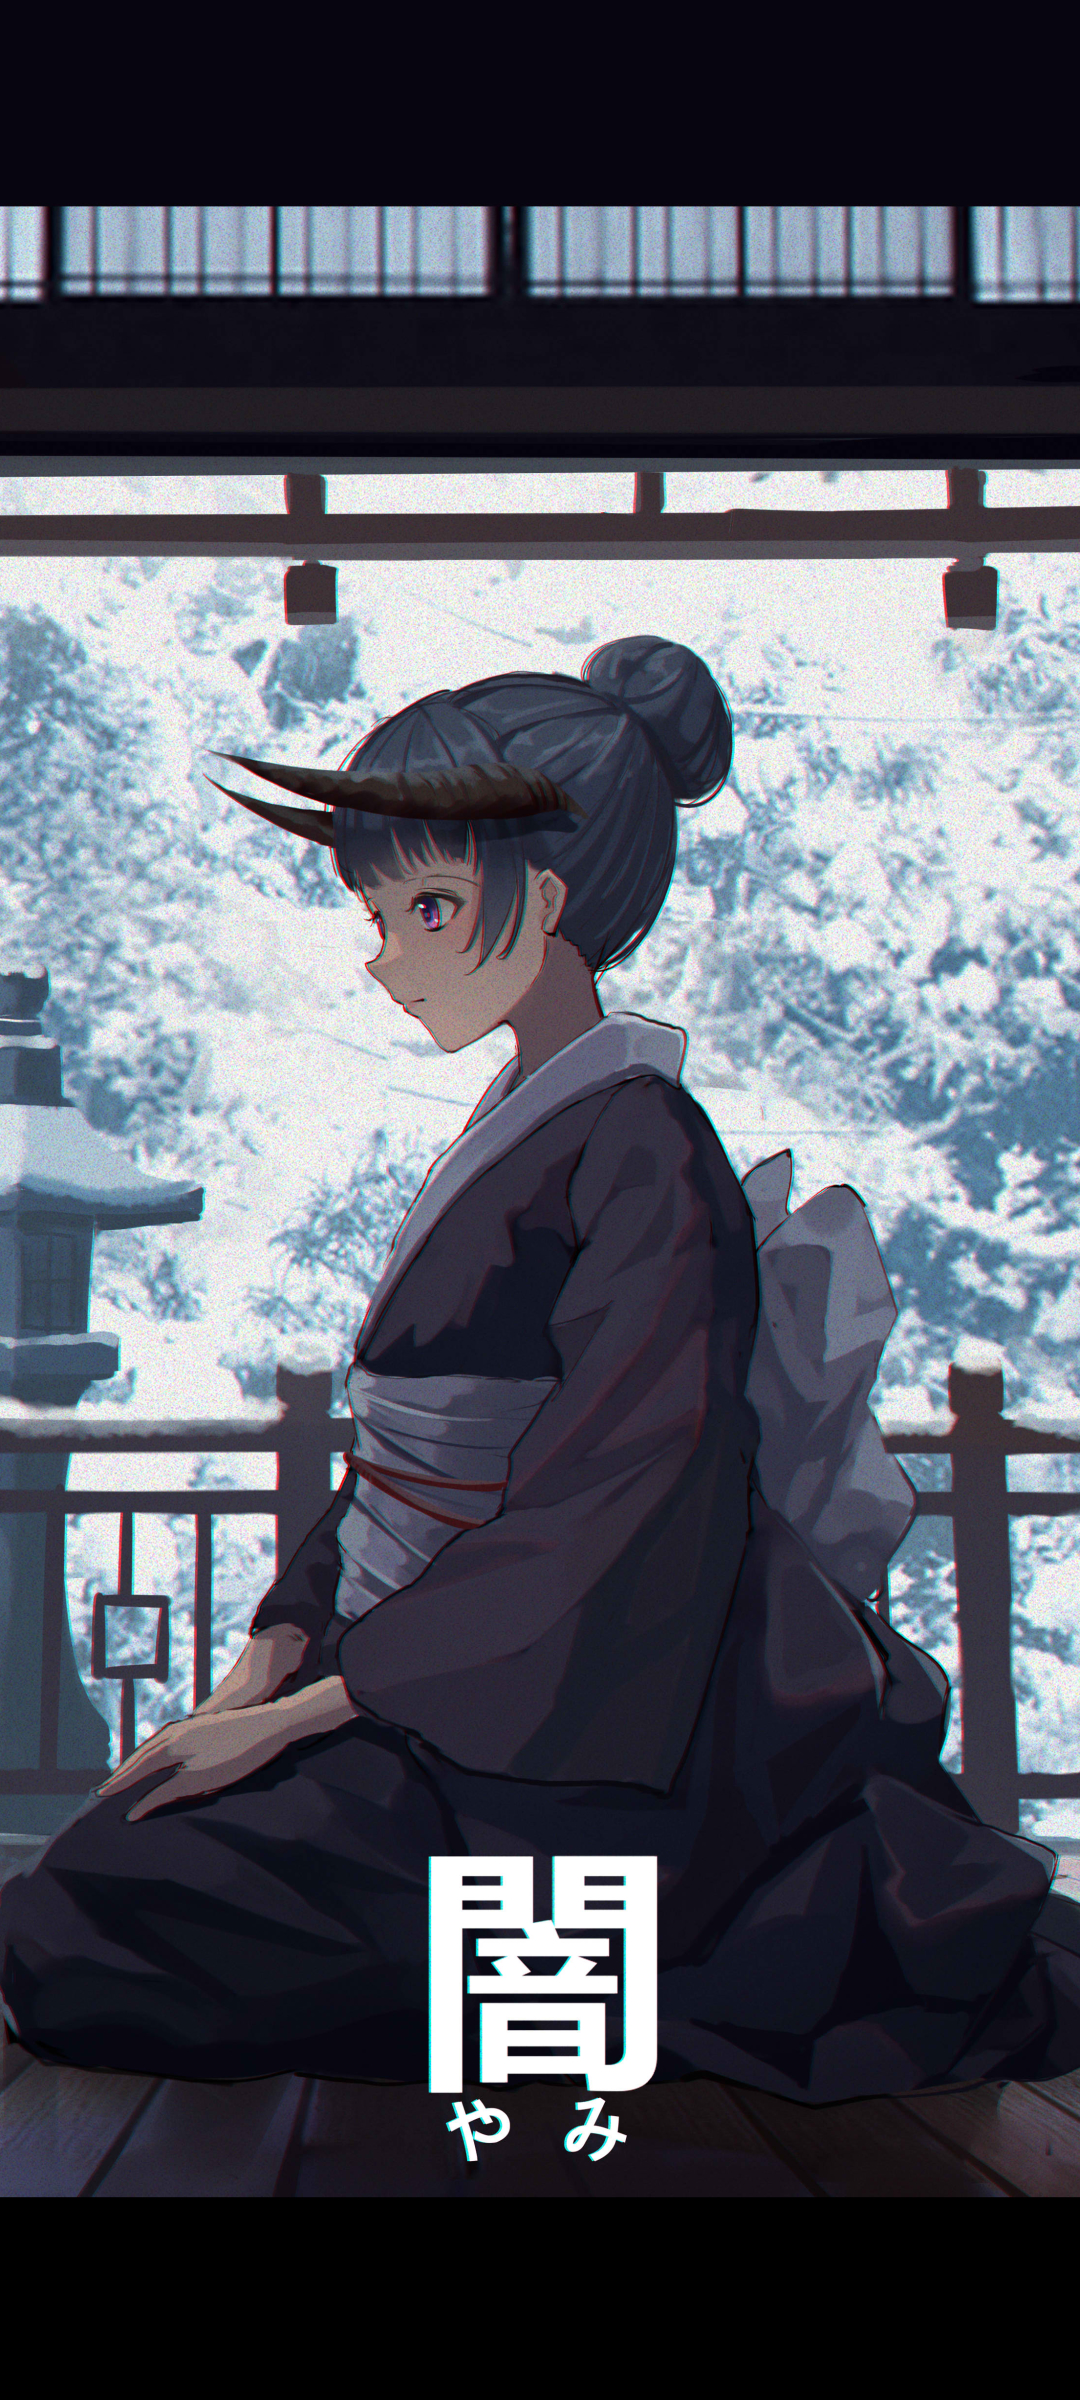 Horned anime girl in a Kimono by Qi==Qi